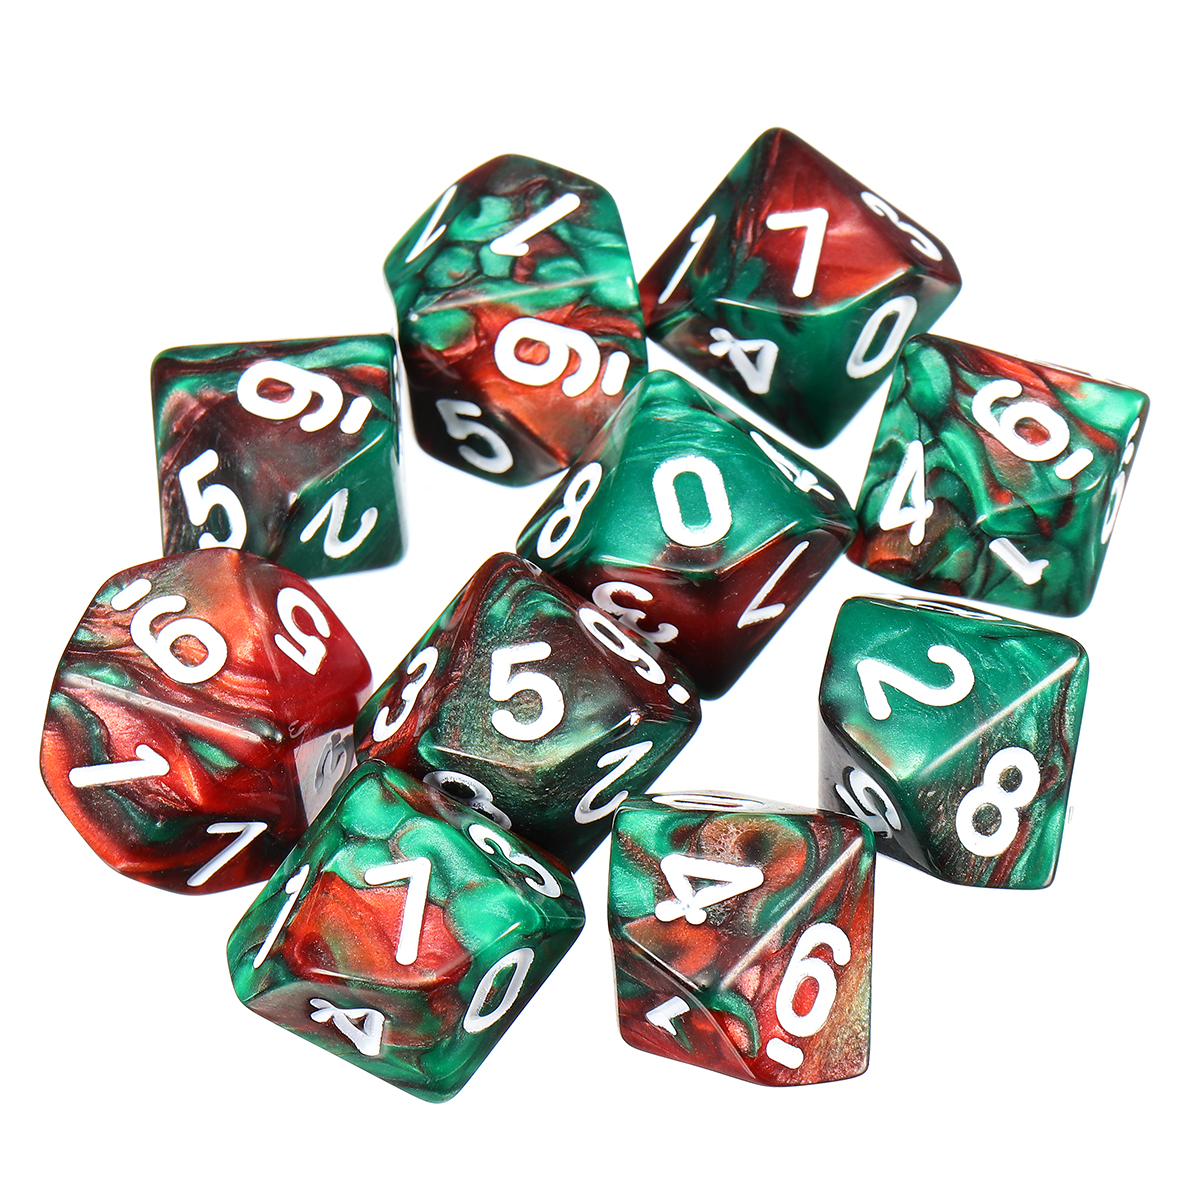 10pcs-10-Sided-Dice-D10-Polyhedral-Dice-RPG-Role-Playing-Game-Dices-w-bag-1351752-5